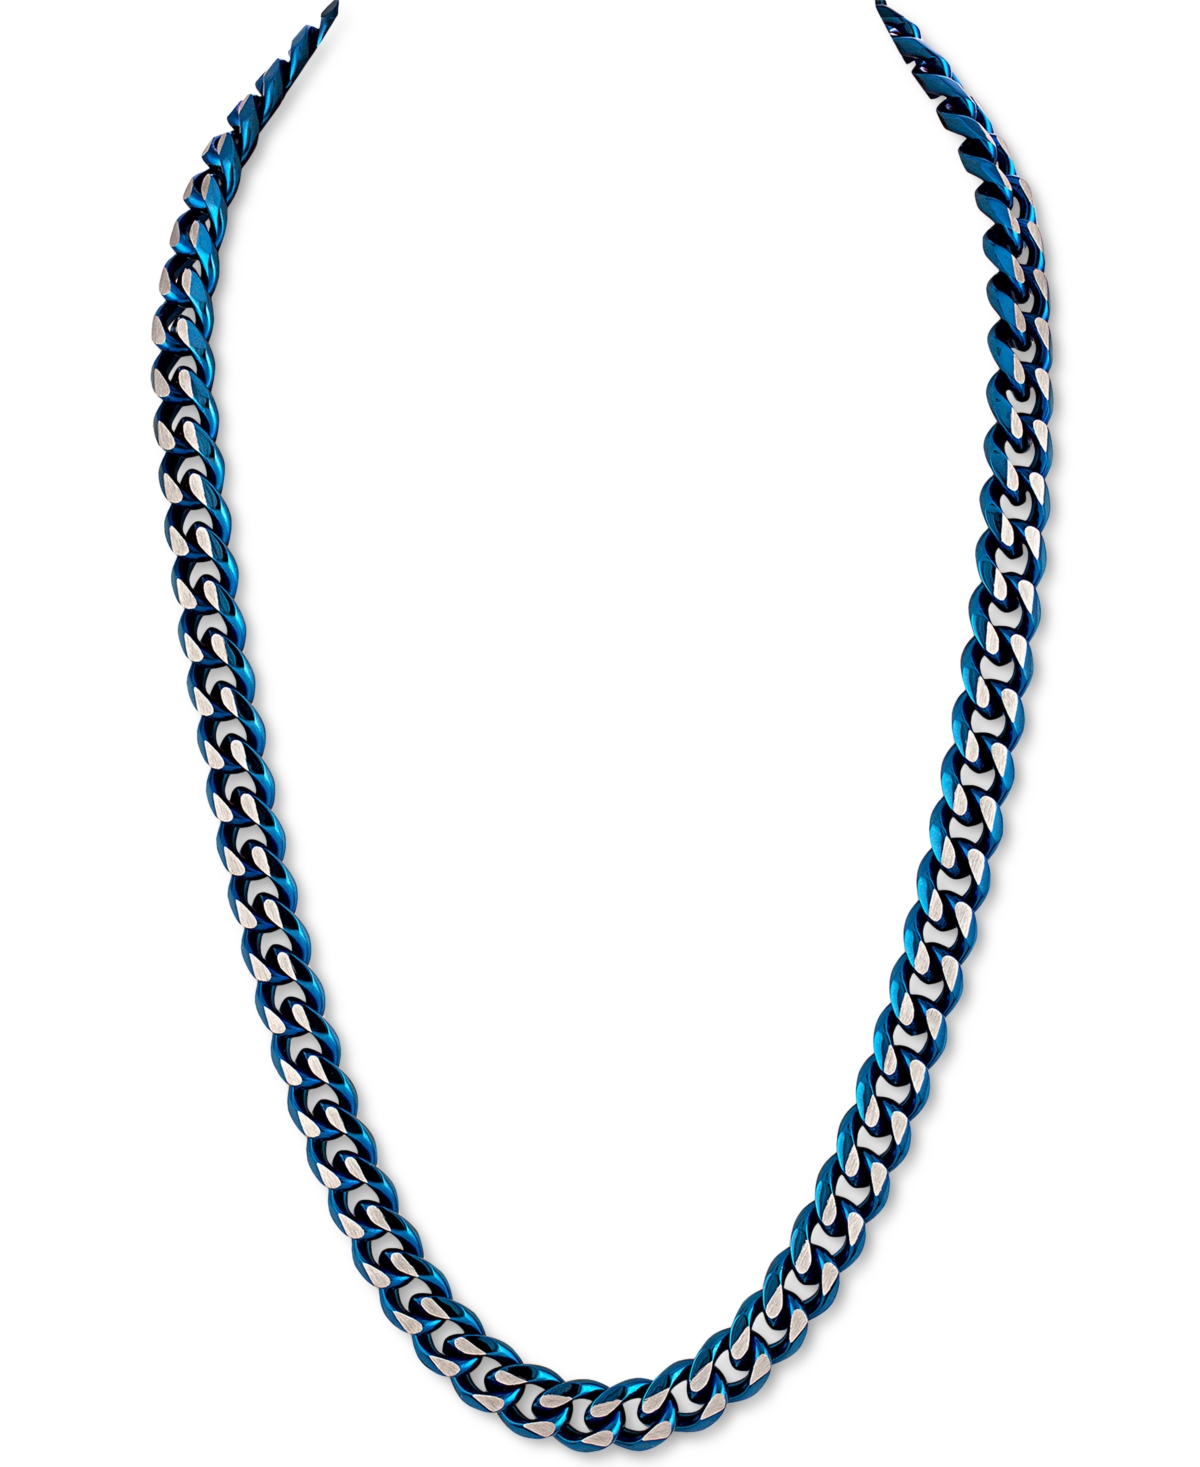 Esquire Men's Jewelry Two-Tone Curb Link 22"Chain Necklace, Created for Macy's